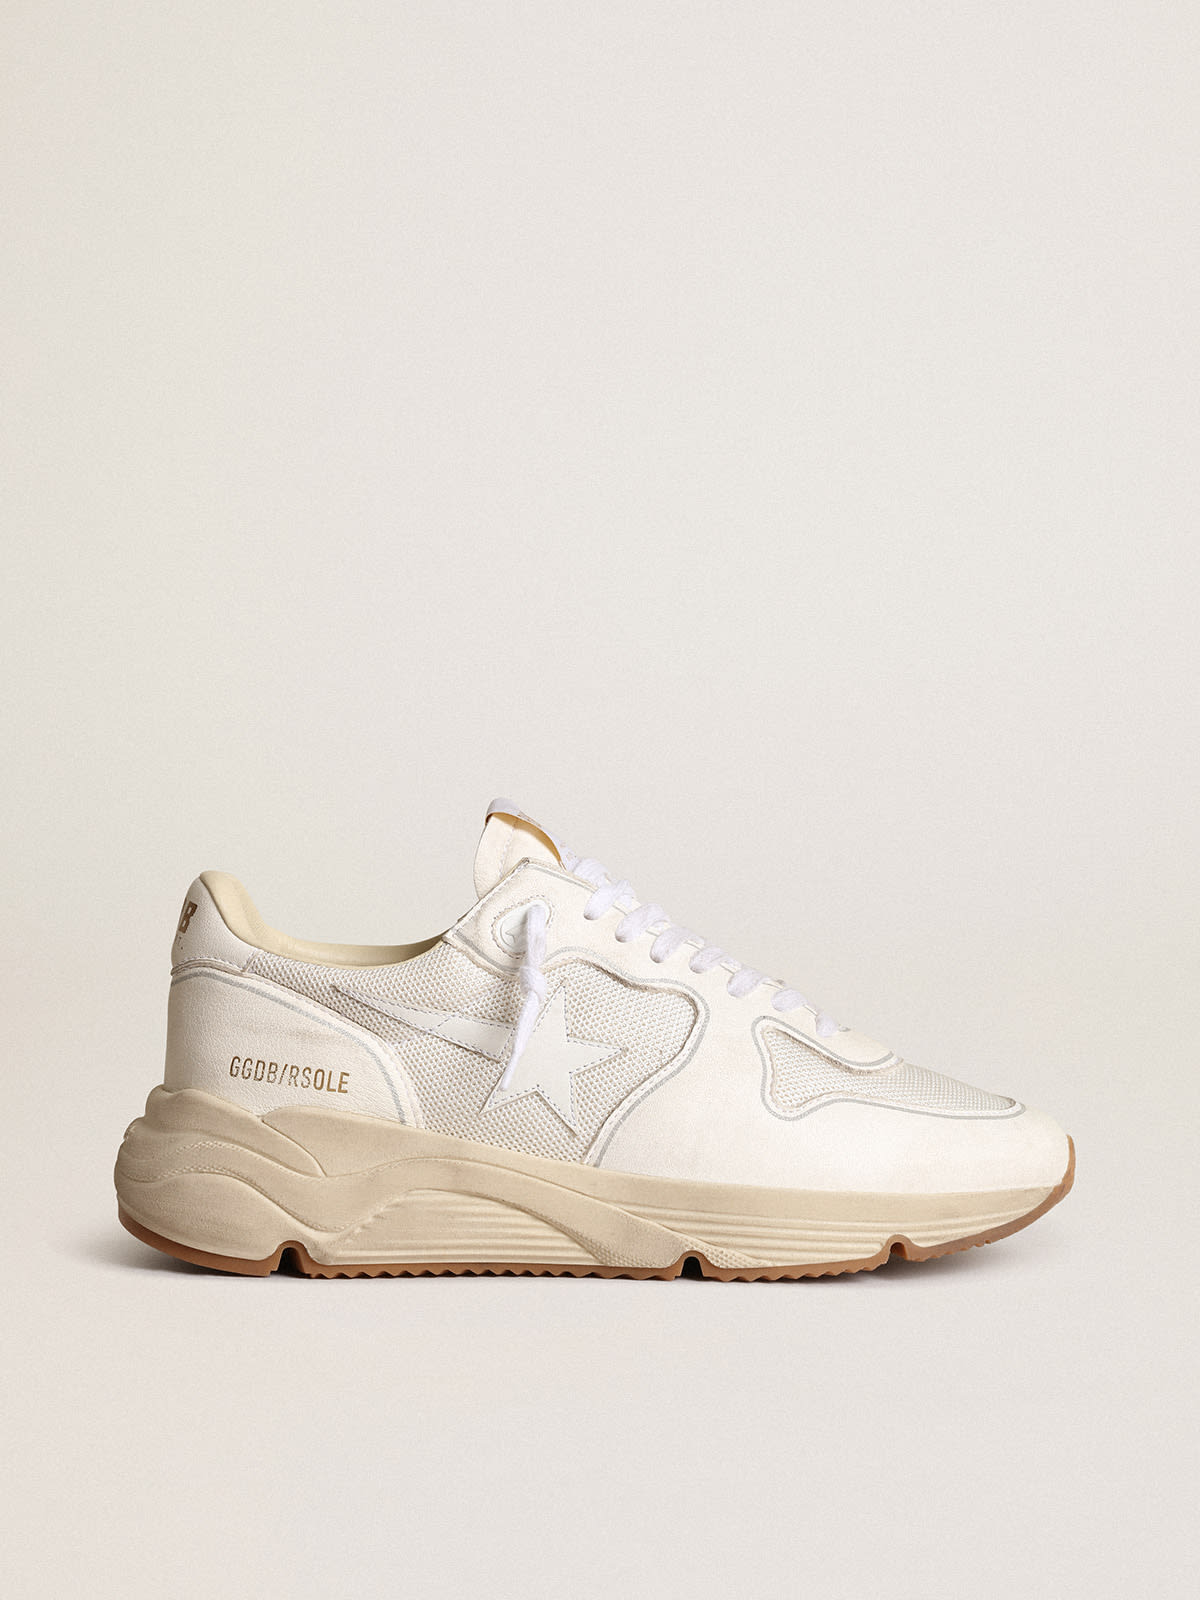 Golden Goose - Men’s Running sole sneakers in optical-white mesh and nappa leather with white leather star in 